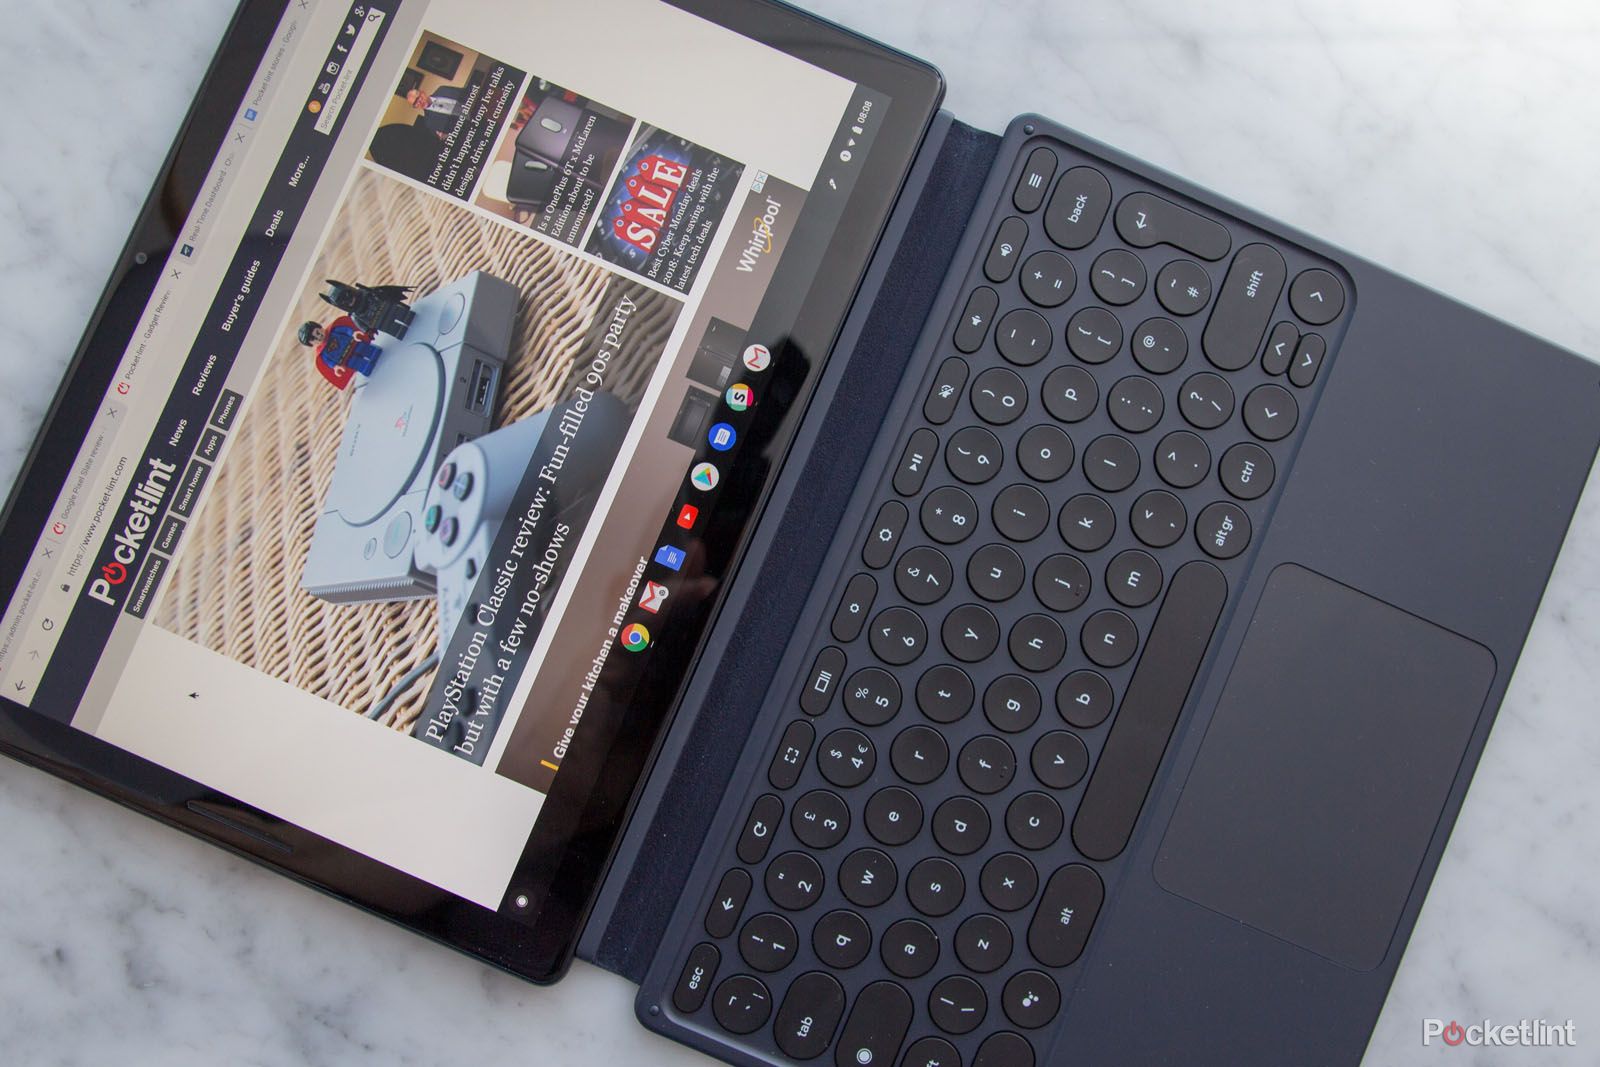 Google confirms new Chrome OS laptop or tablet is in the works image 1